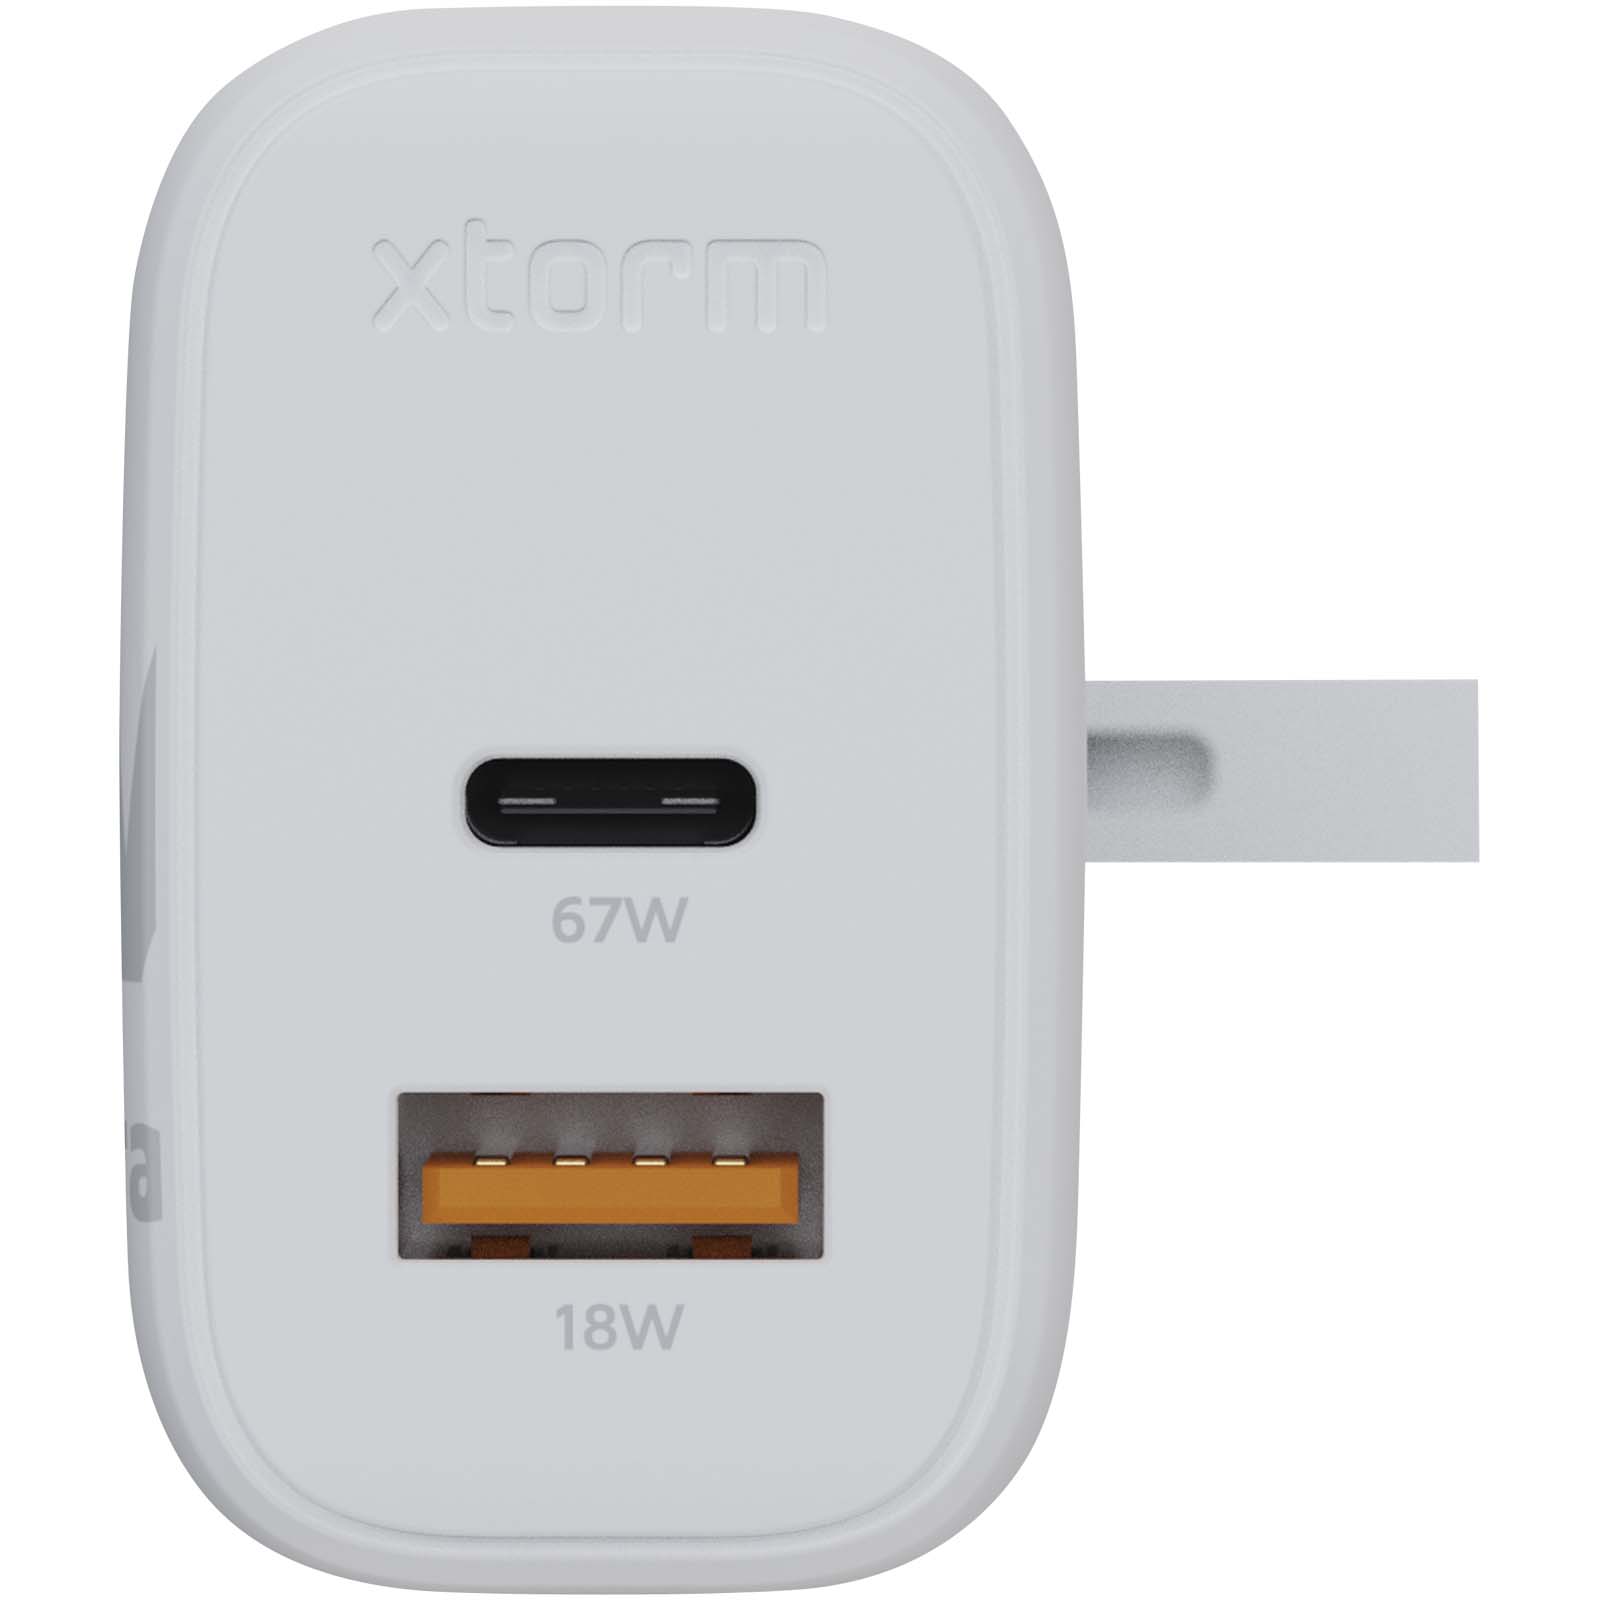 Advertising Chargers - Xtorm XEC067G GaN² Ultra 67W wall charger - UK plug - 1